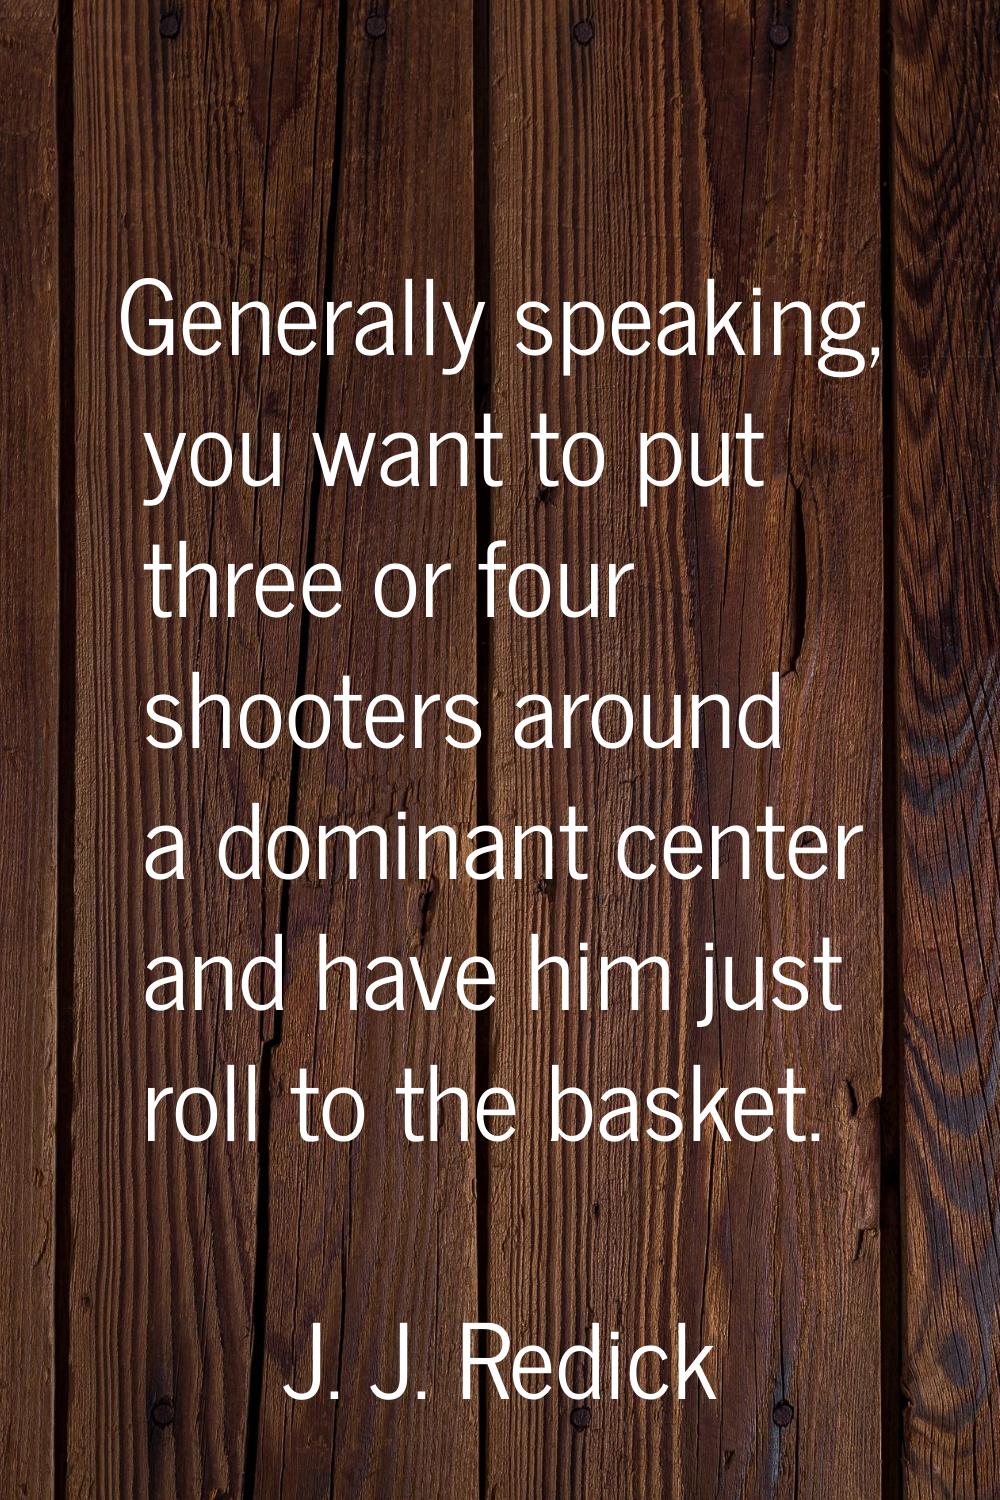 Generally speaking, you want to put three or four shooters around a dominant center and have him ju